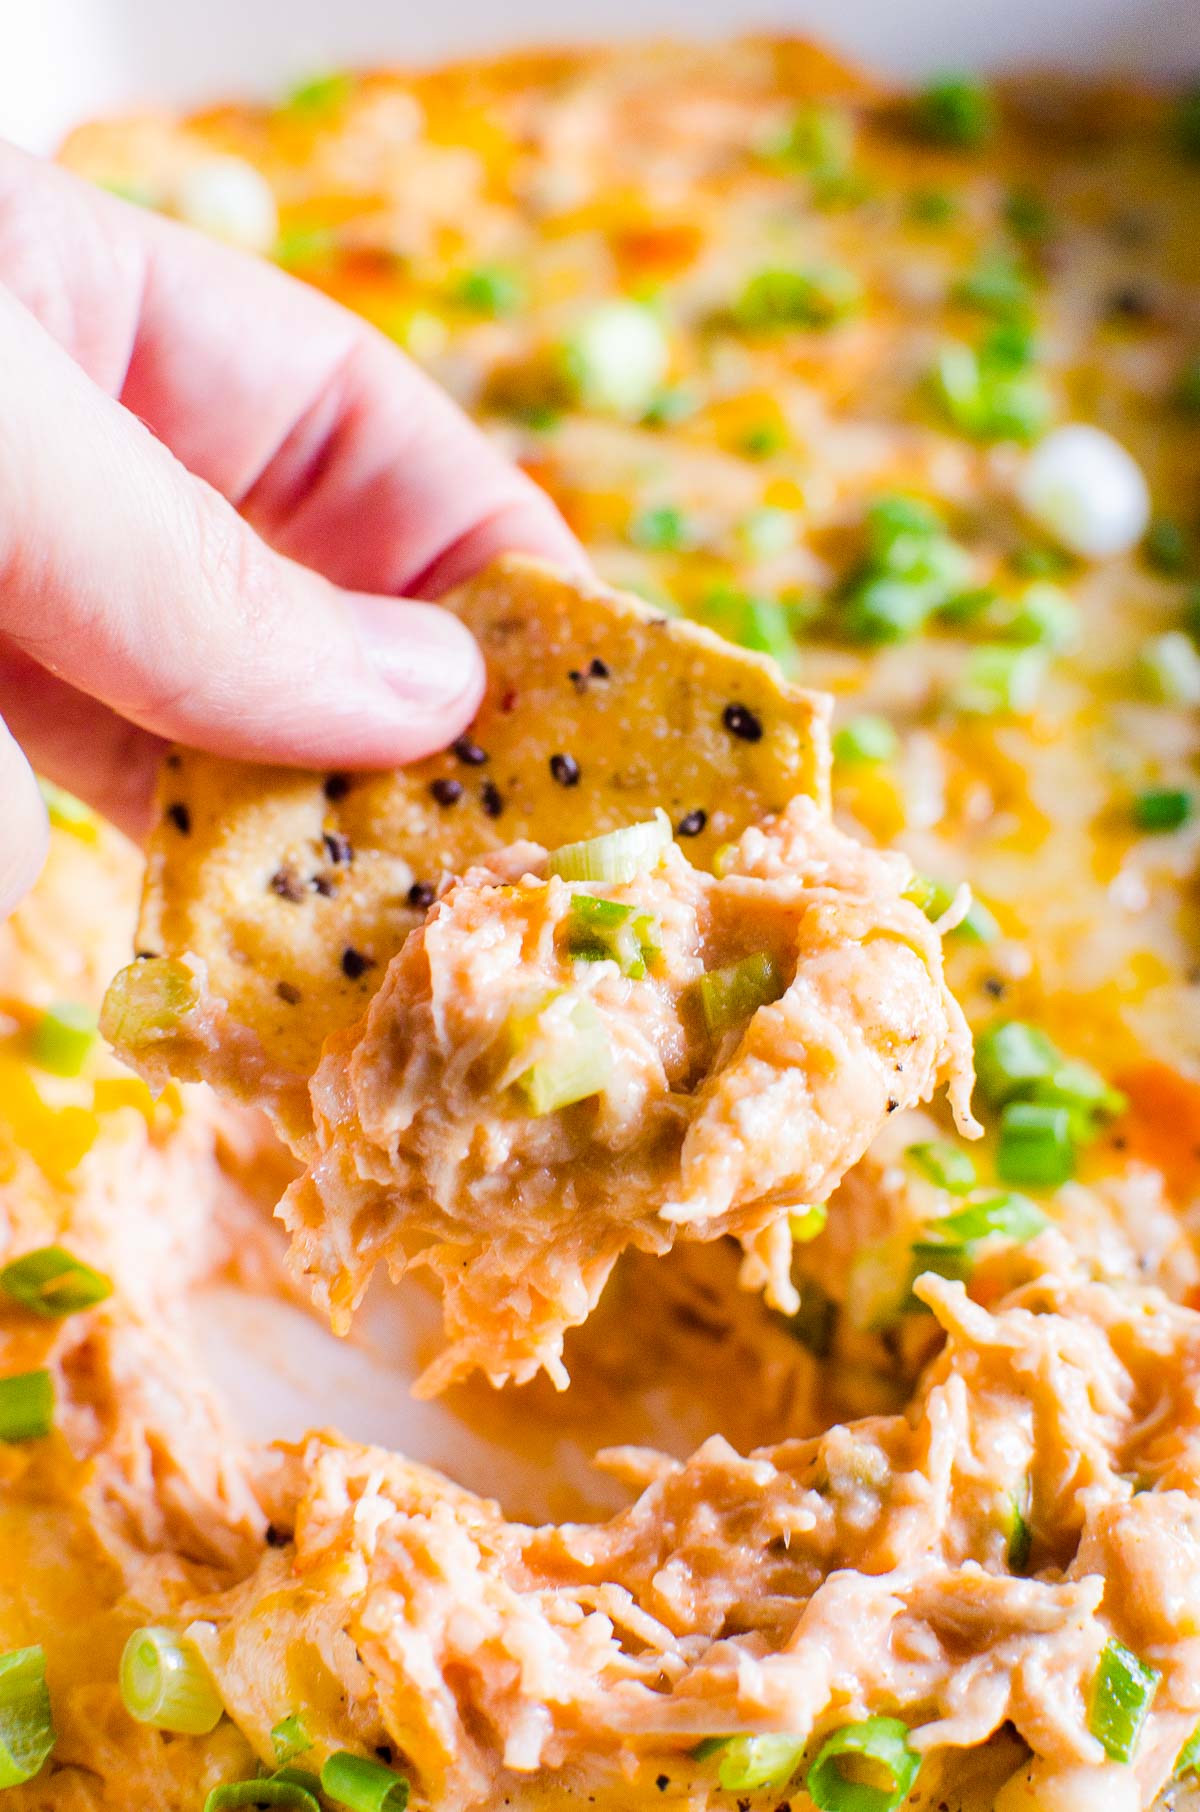 Buffalo chicken dip scooped up with a chip.